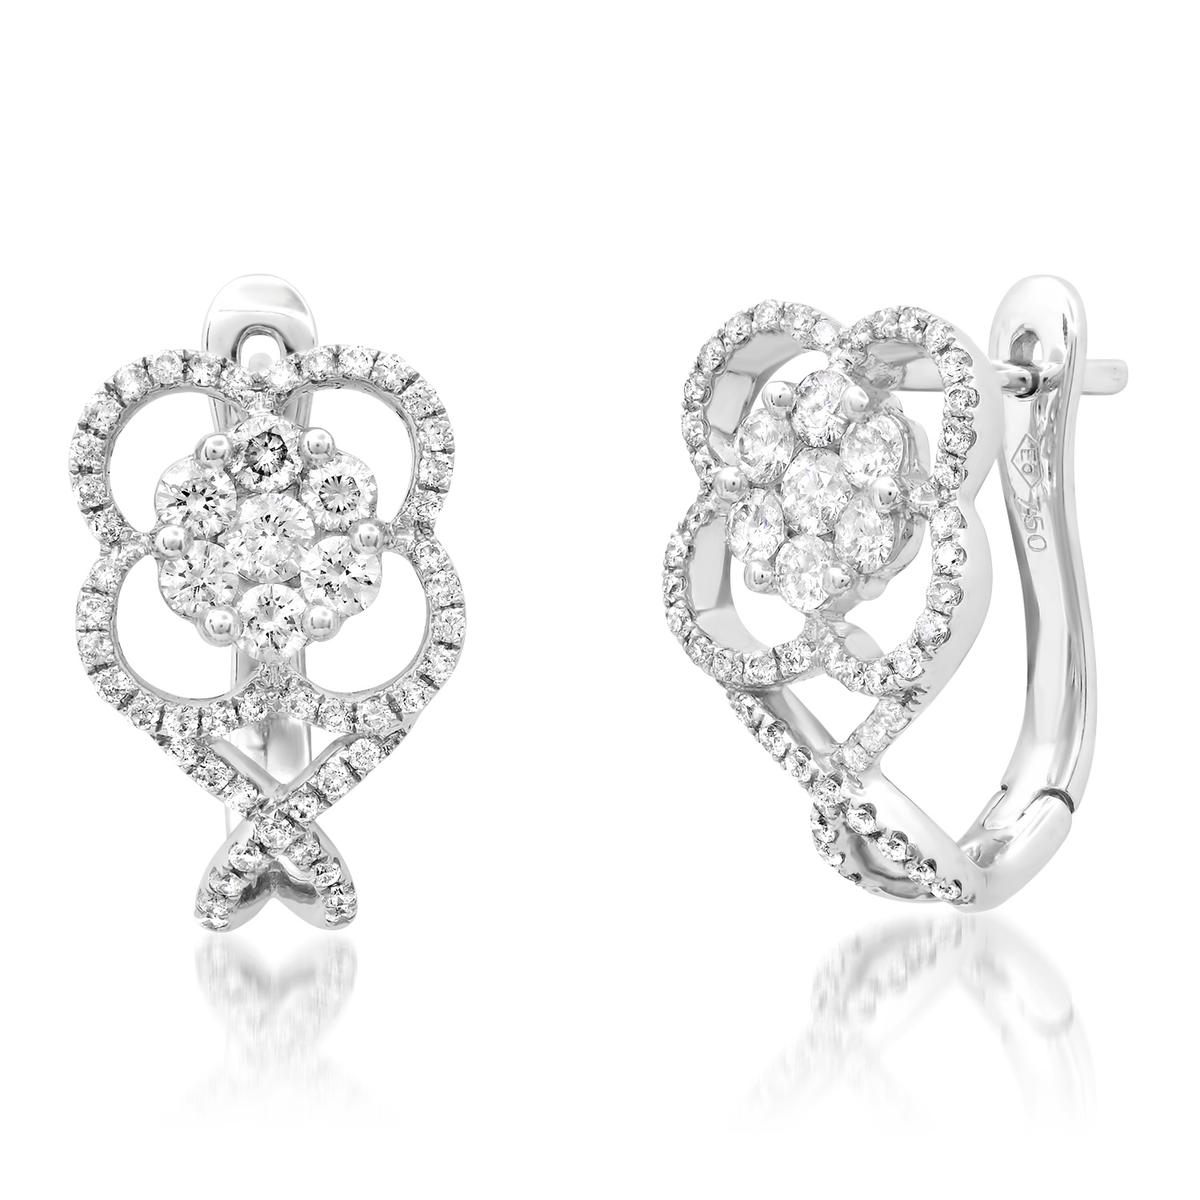 18K White Gold Setting with 1.12ct Diamond Earrings